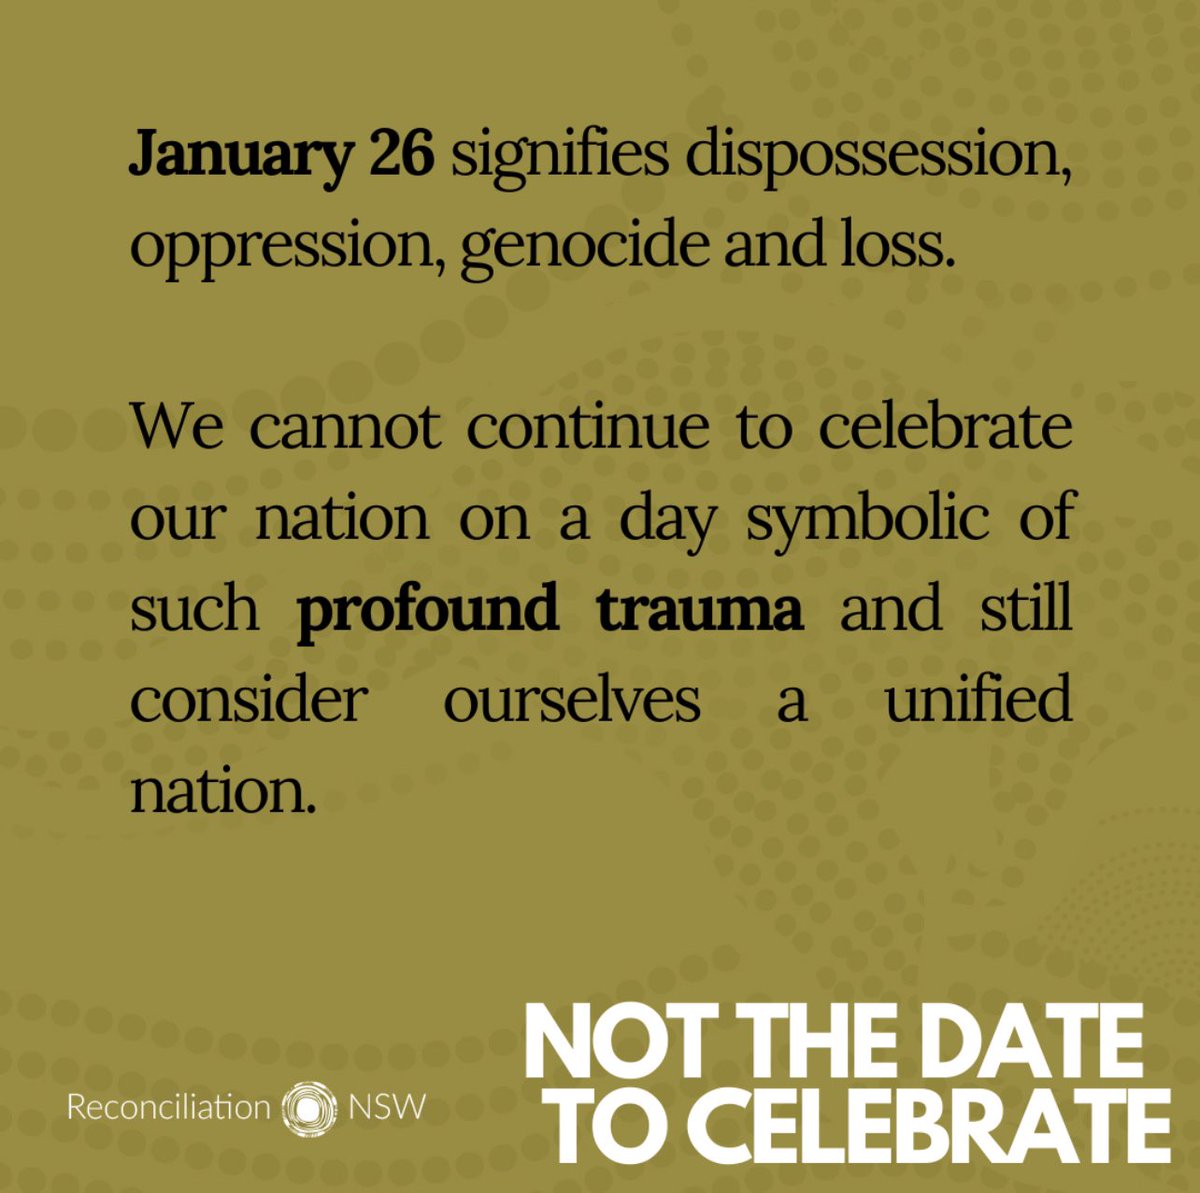 Not the date to celebrate. 
Survival Day ❤️
TY @NSWRC 🖤💛❤️